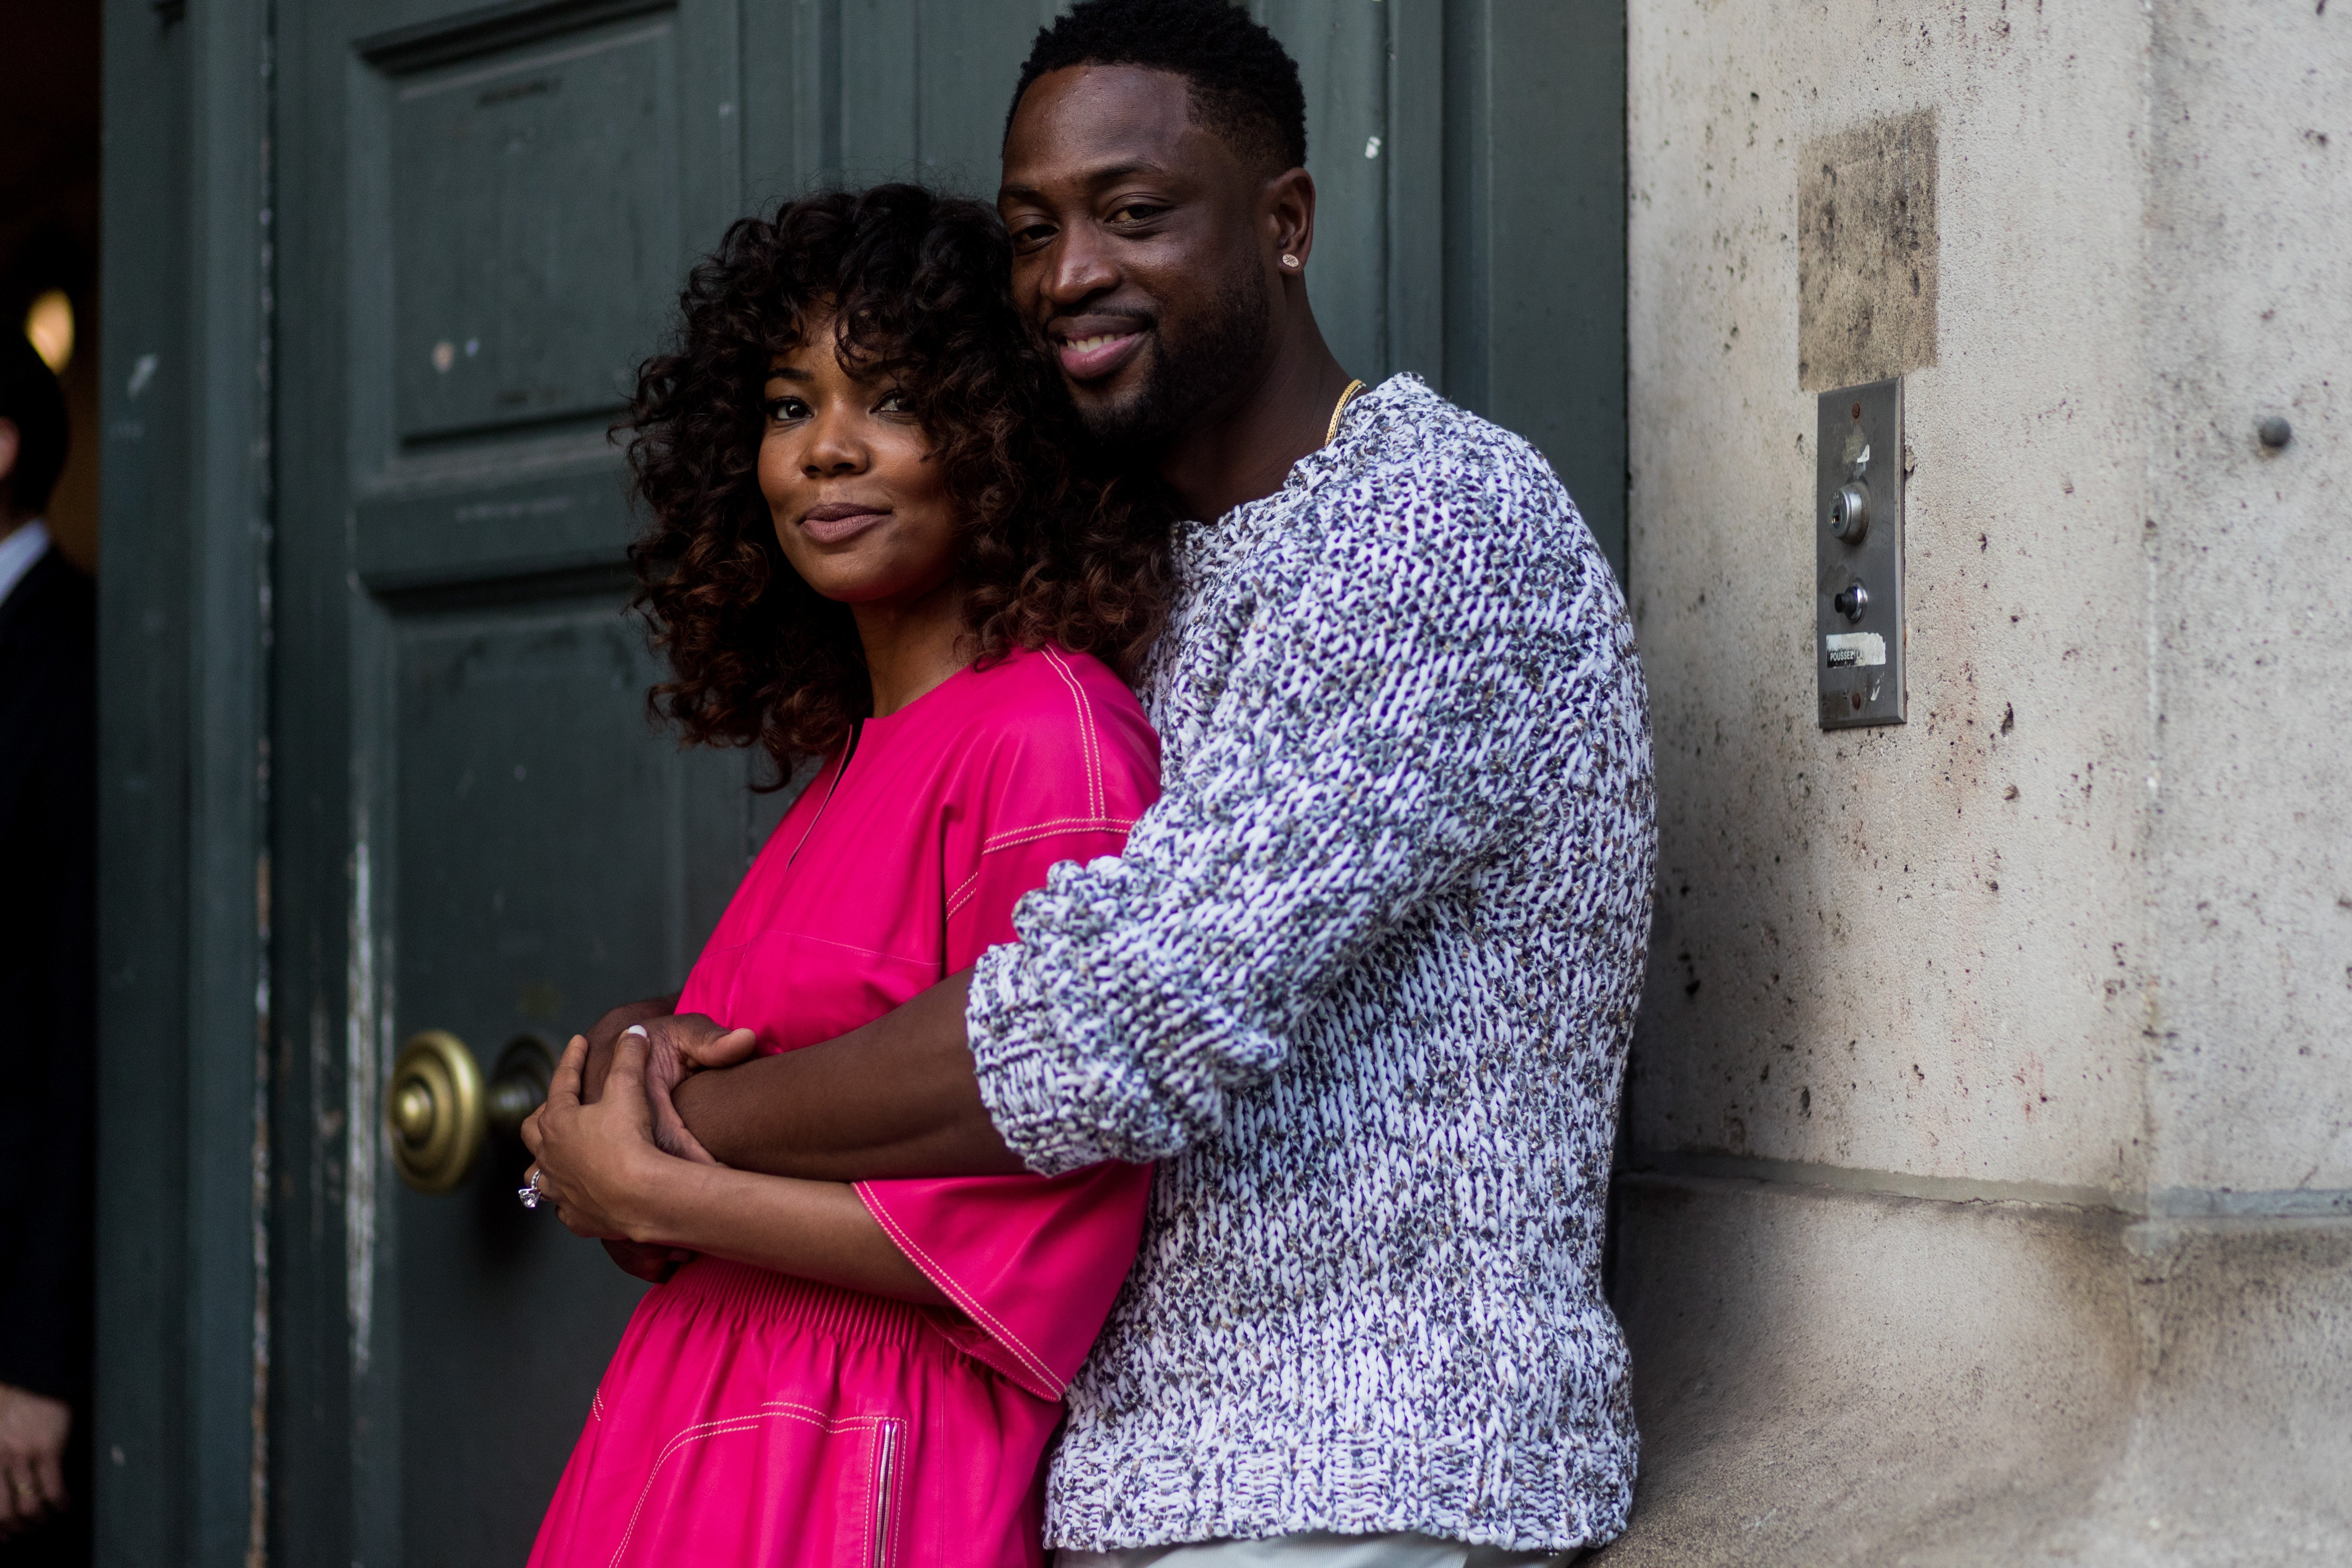 Gabrielle Union & Dwyane Wade hugging outside Hermes during Paris Fashion Week on June 24, 2017 in France | Photo: Getty Images